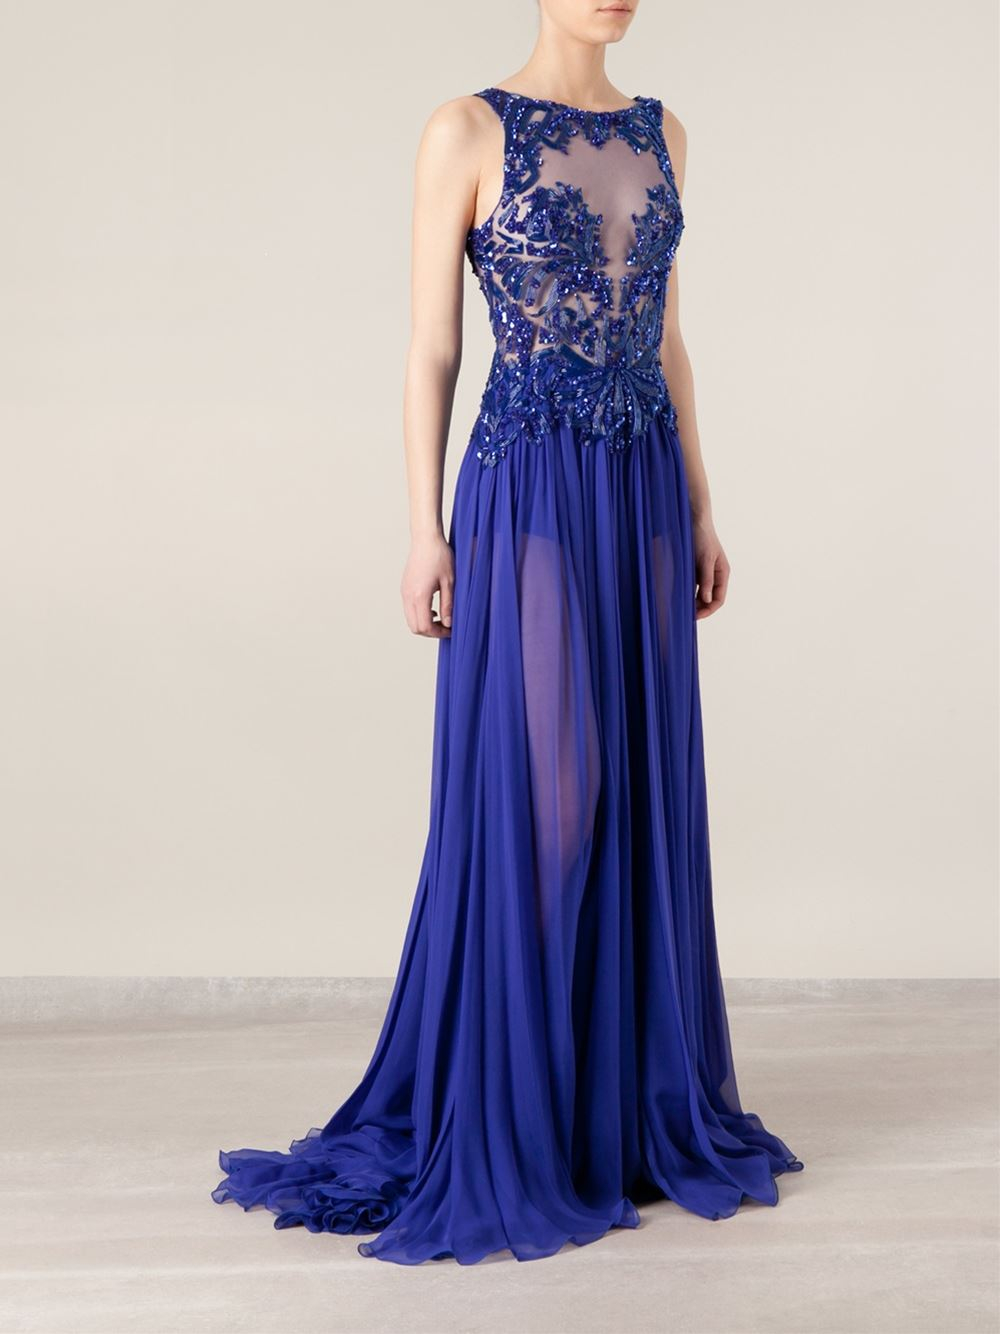 Zuhair Murad Sequin Embellished Pleated Gown in Blue - Lyst